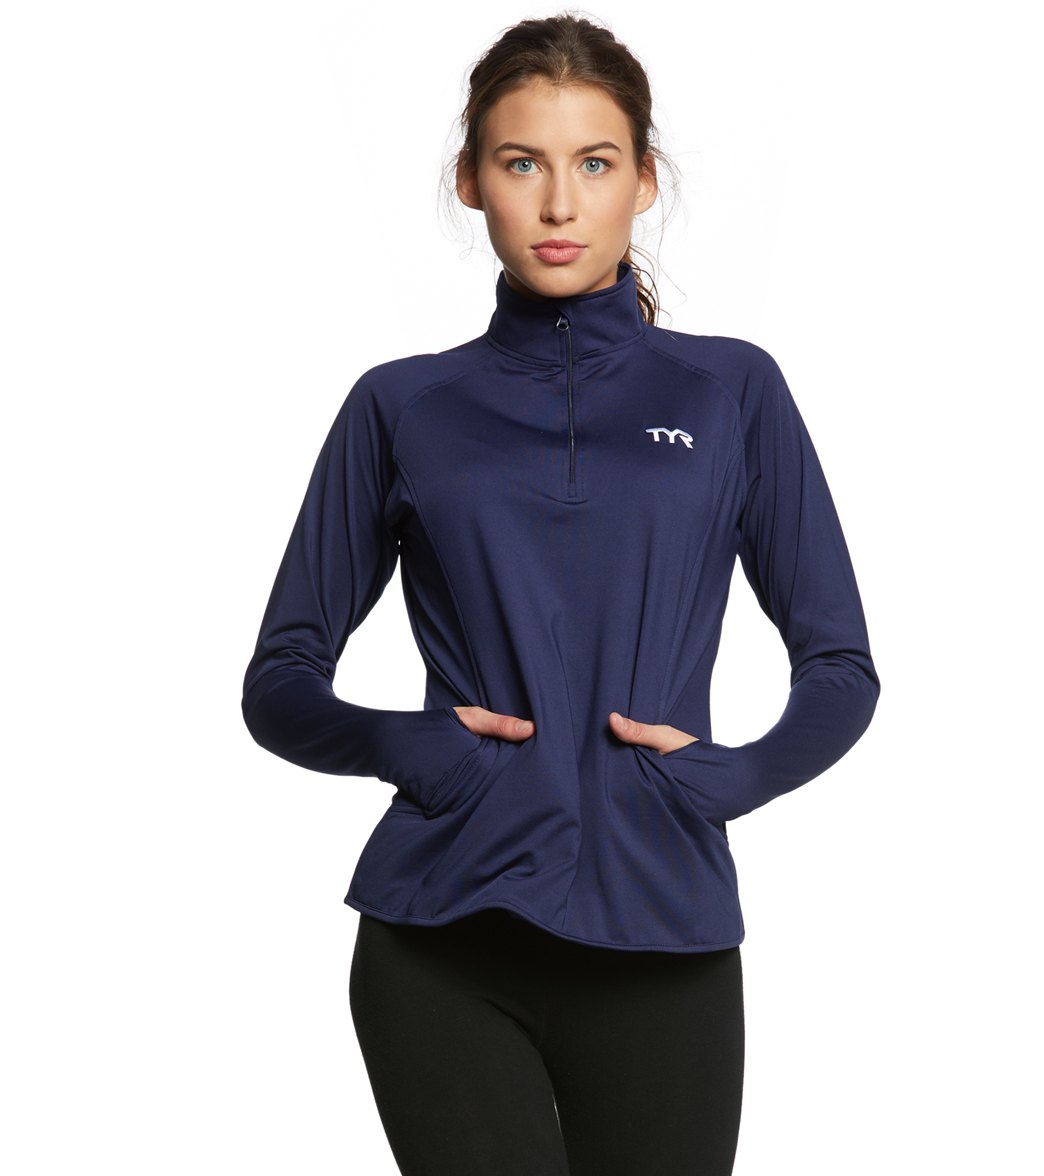 TYR Women's Alliance 1/4 Zip Pullover Warm Up Jacket - Navy Large Polyester/Spandex - Swimoutlet.com